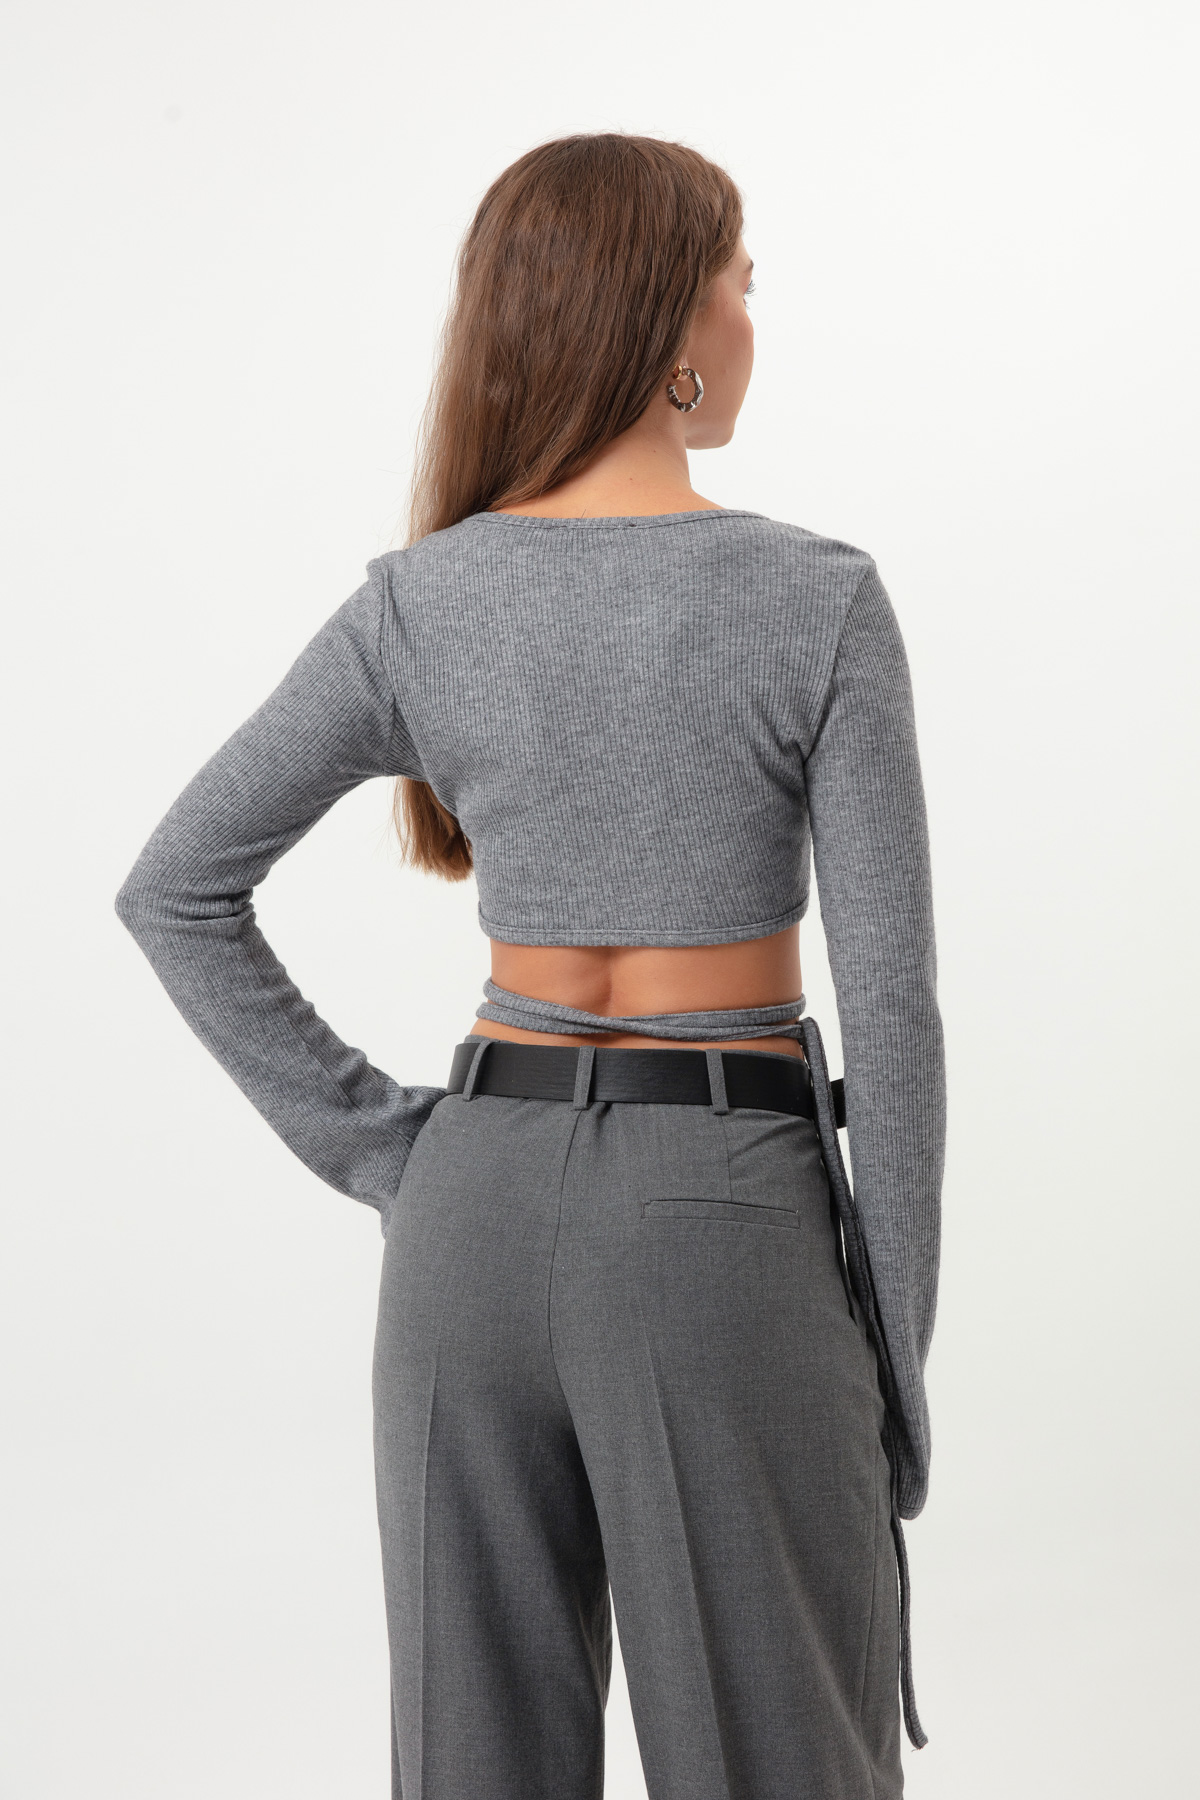 Women's Anthracite Knitted Crop